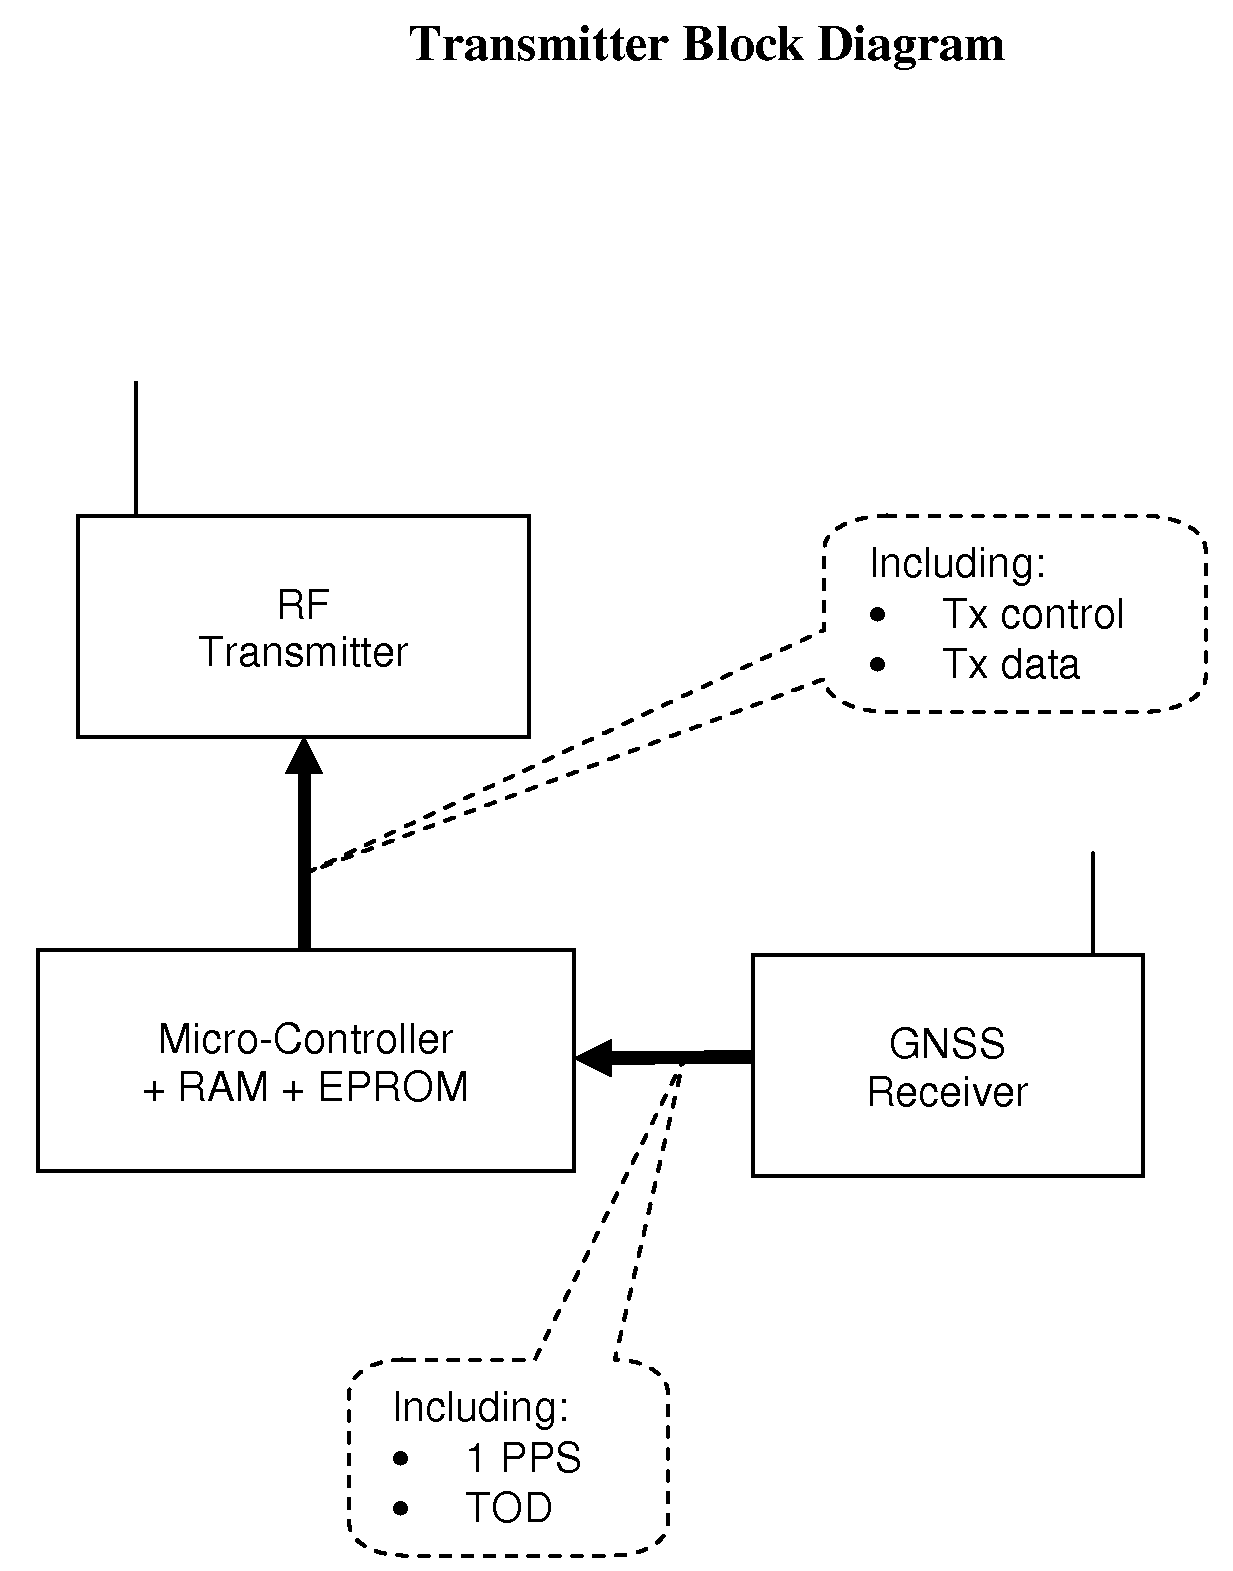 Modulating transmission timing for data communications